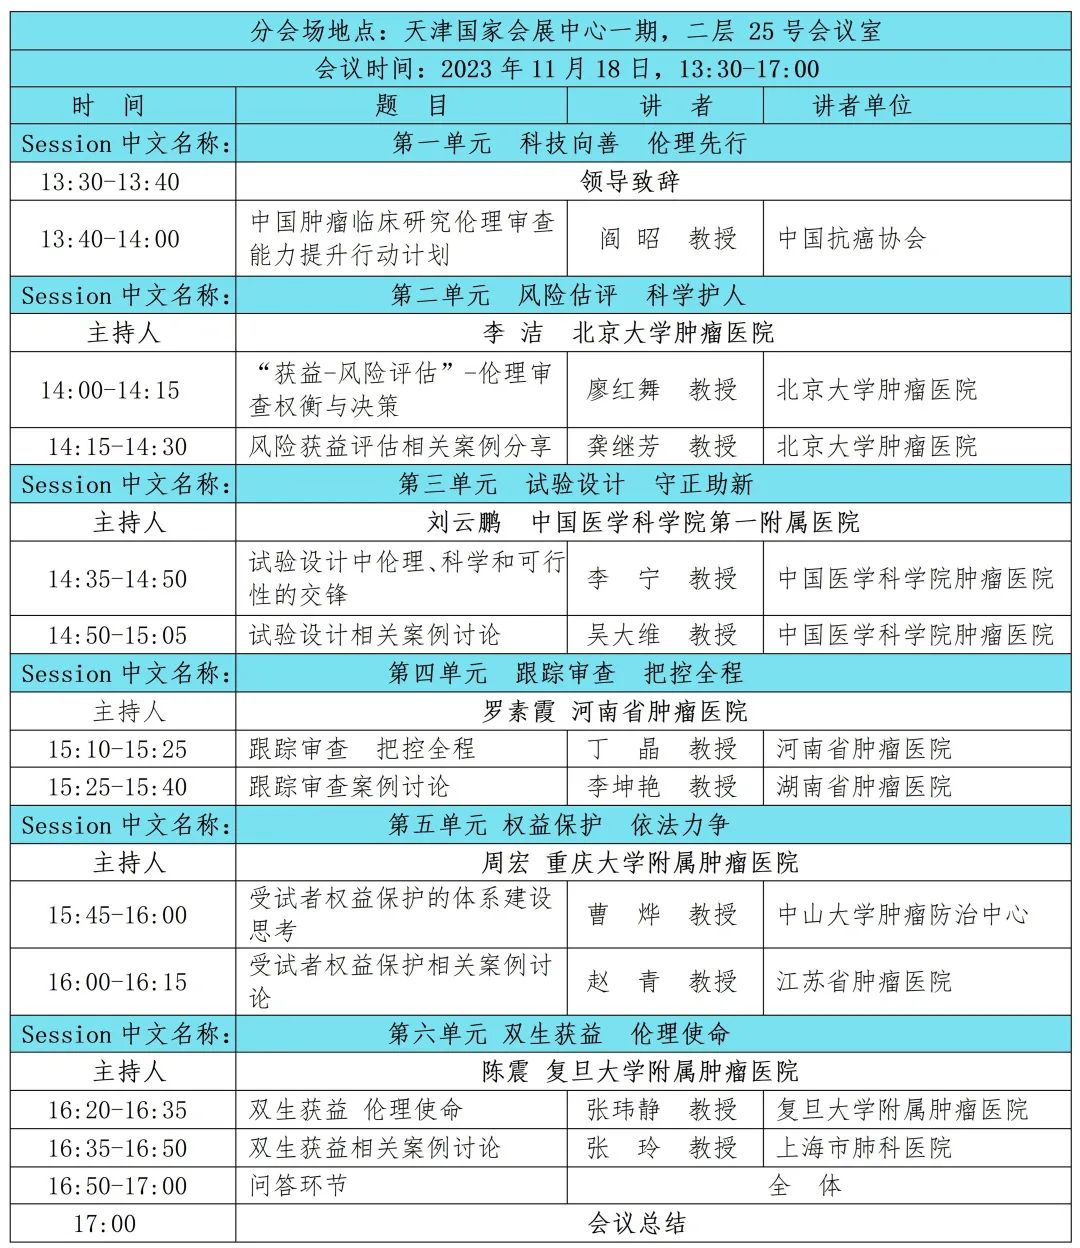 2023 CCHIO | 会议通知：中国<font color="red">抗癌</font><font color="red">协会</font>医学伦理学分会场（第二轮）